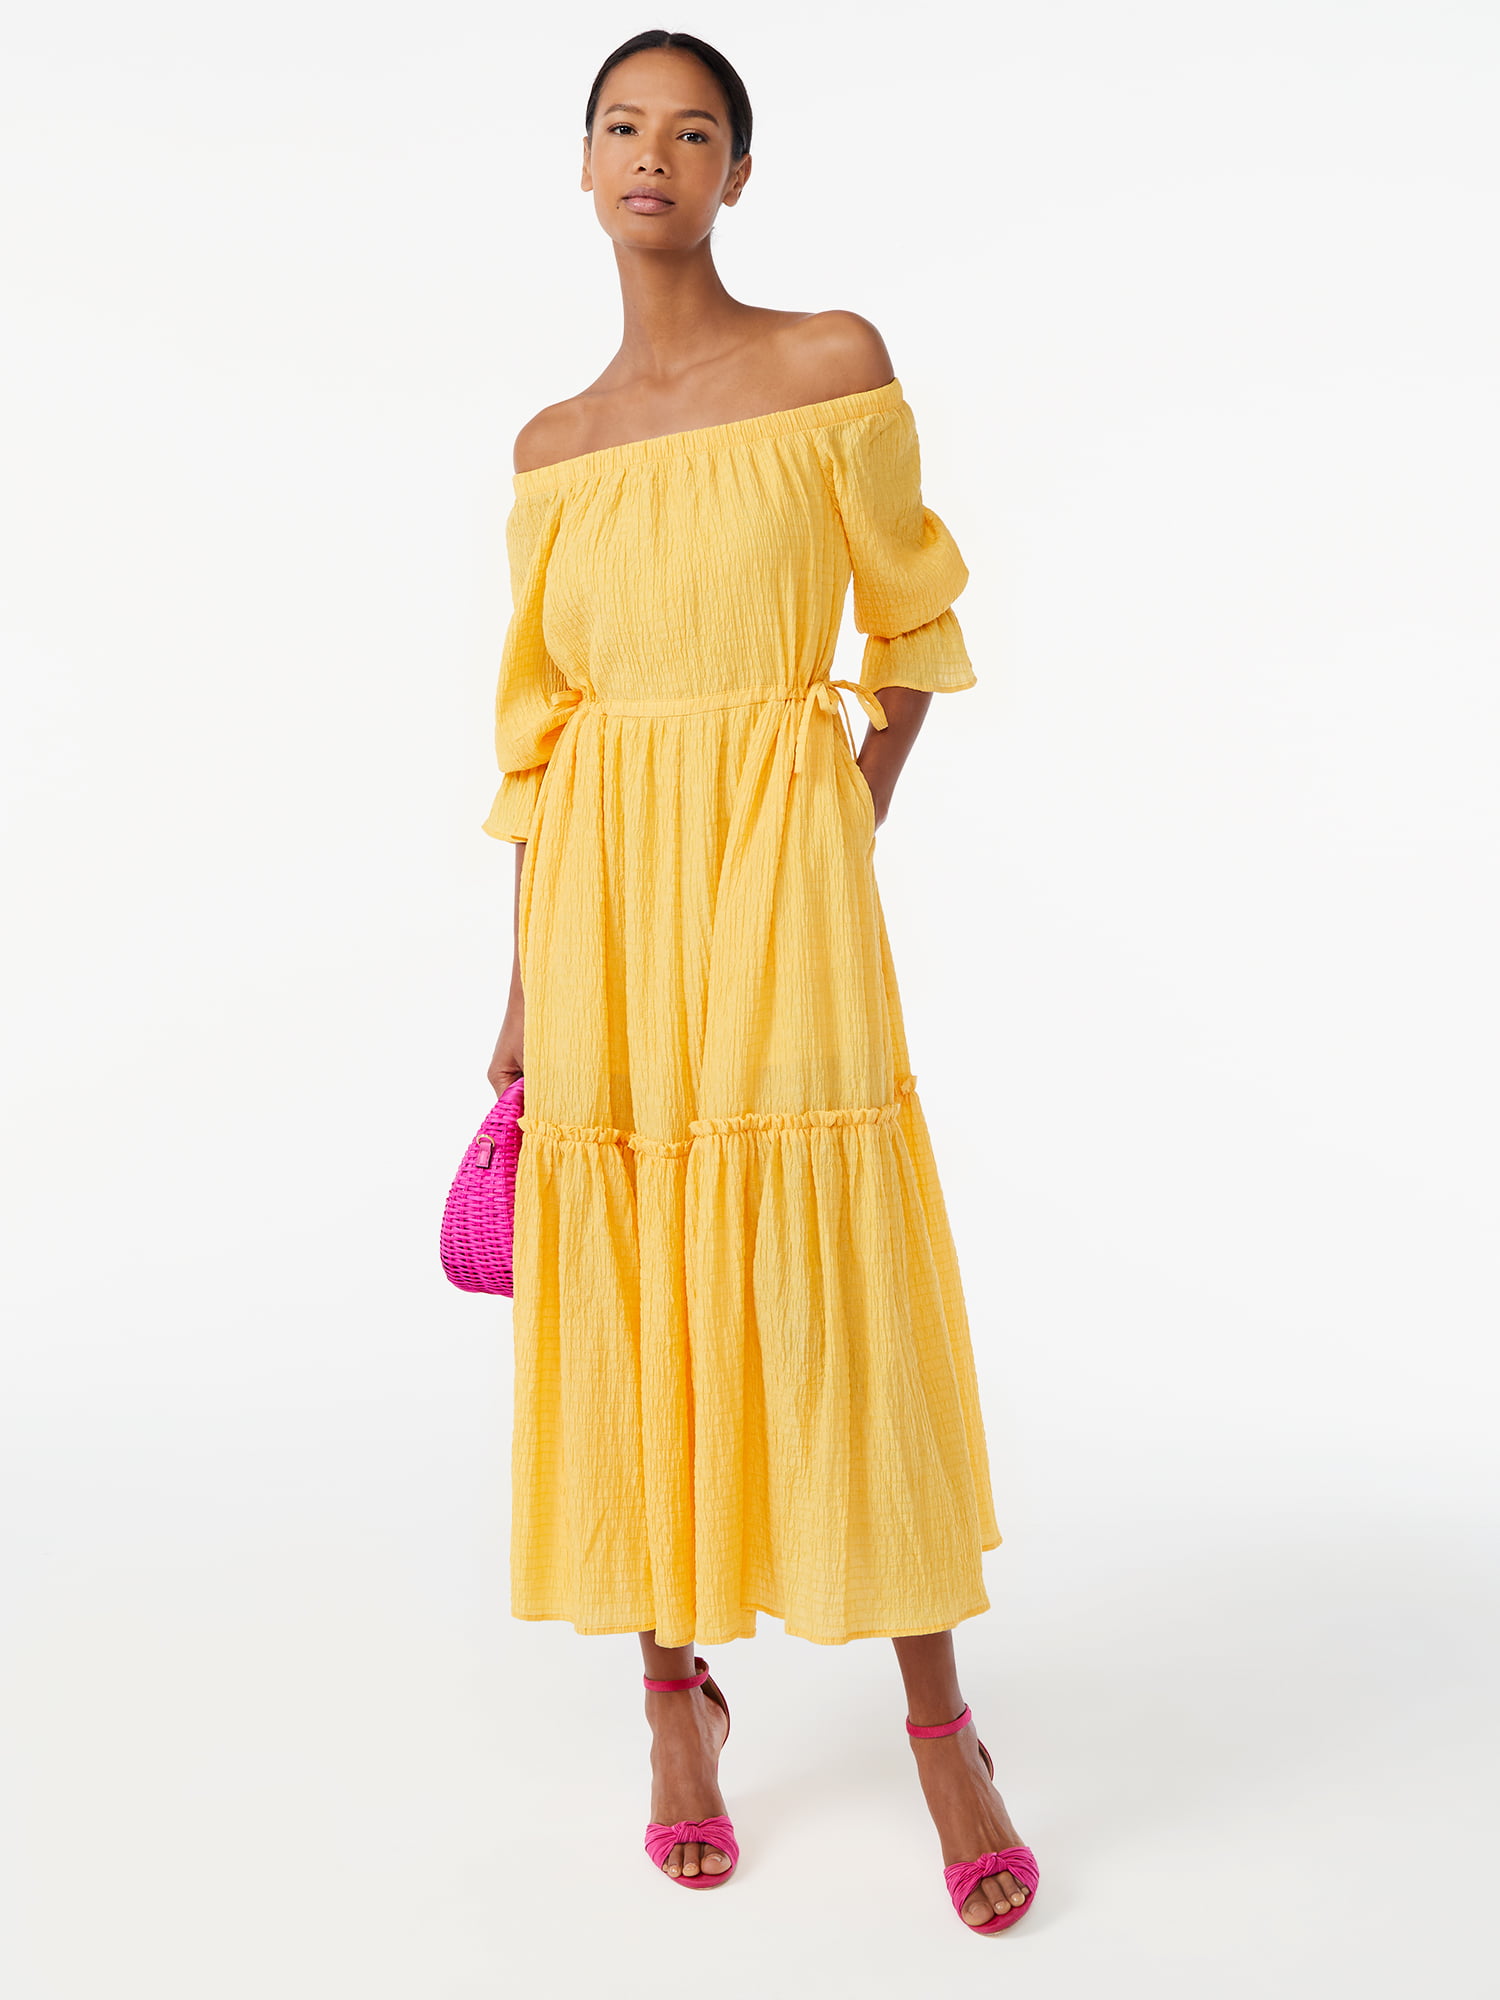 Scoop Women's Voluminous Off Shoulder Maxi Dress (amber yellow, red or green polka dot) $10 + Free Shipping w/ Walmart+ or on $35+